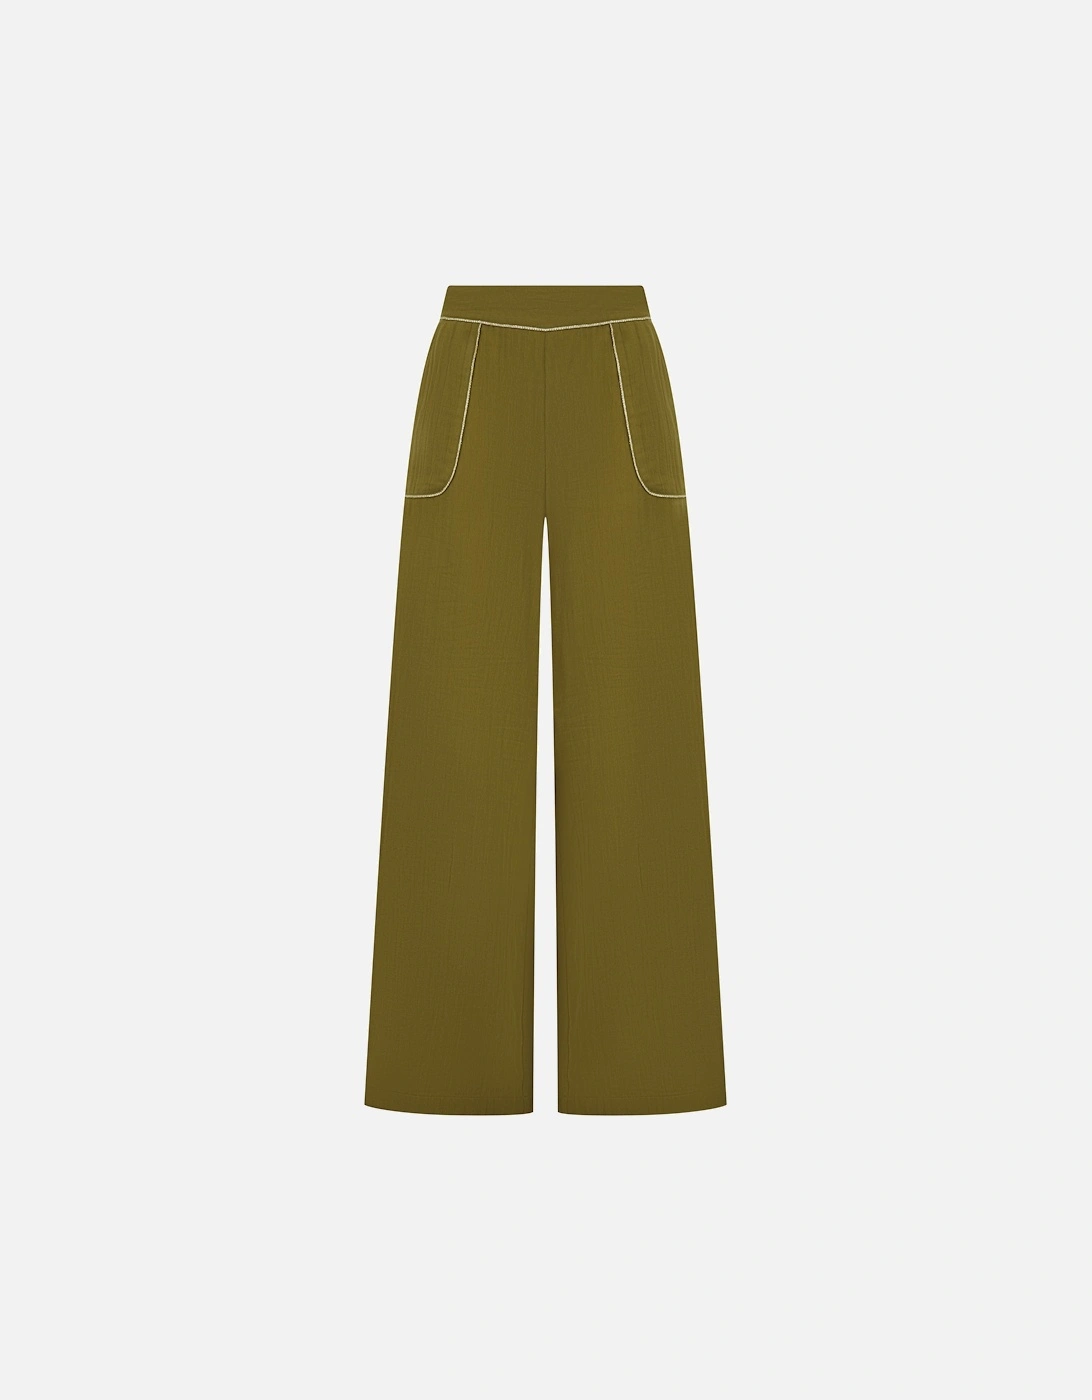 Clipper Trousers in Olive